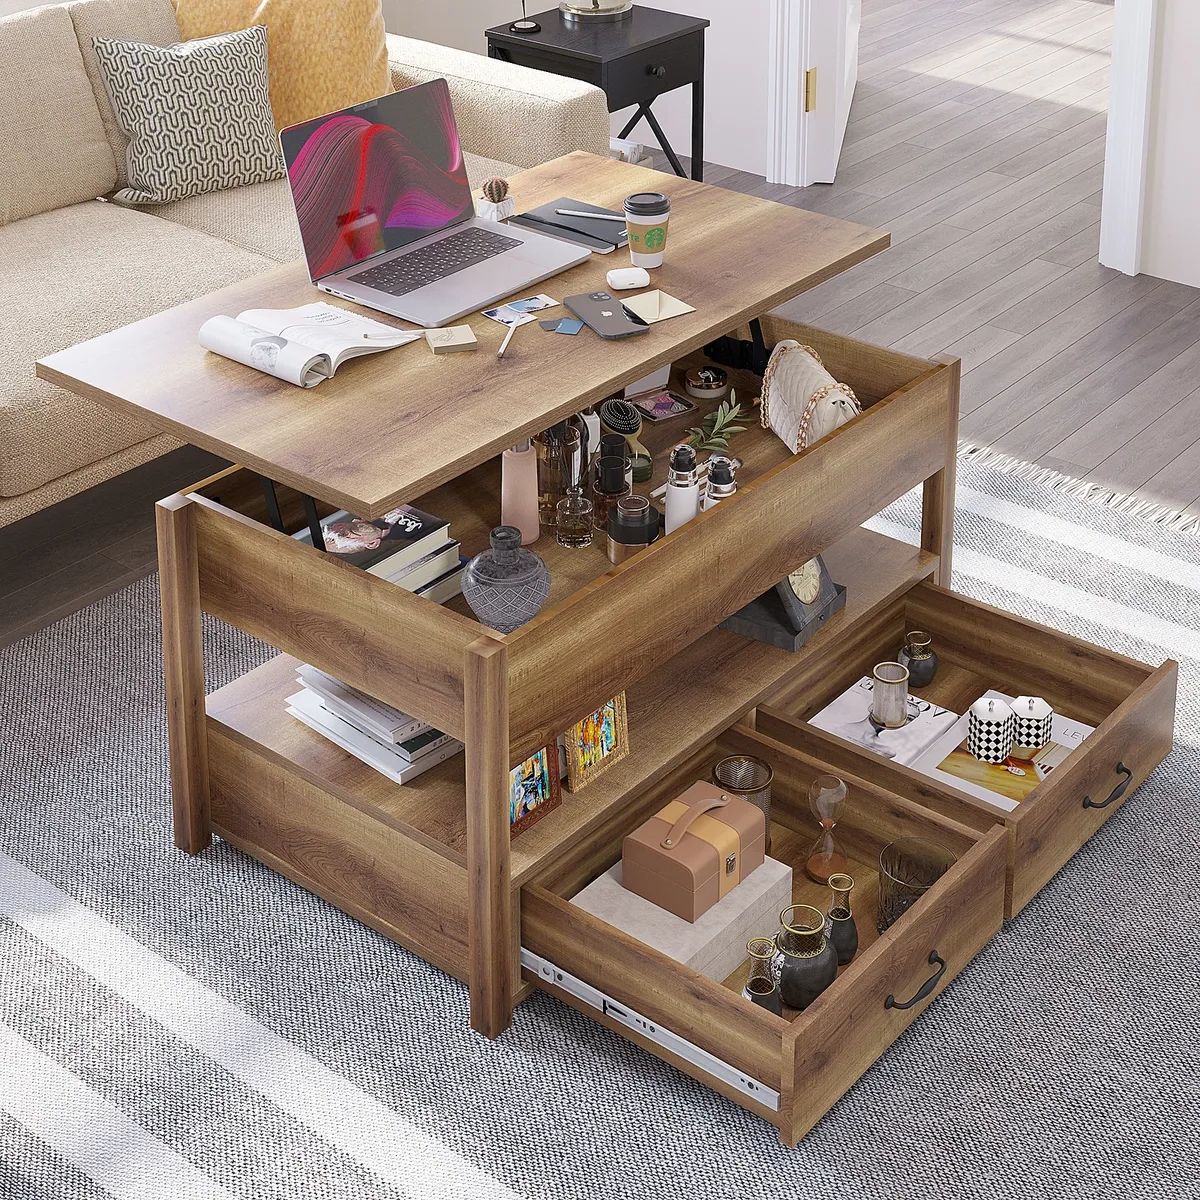 2 Drawer Lift Top Coffee Table Wooden With Hidden Compartment & Storage  Shelves (View 2 of 10)